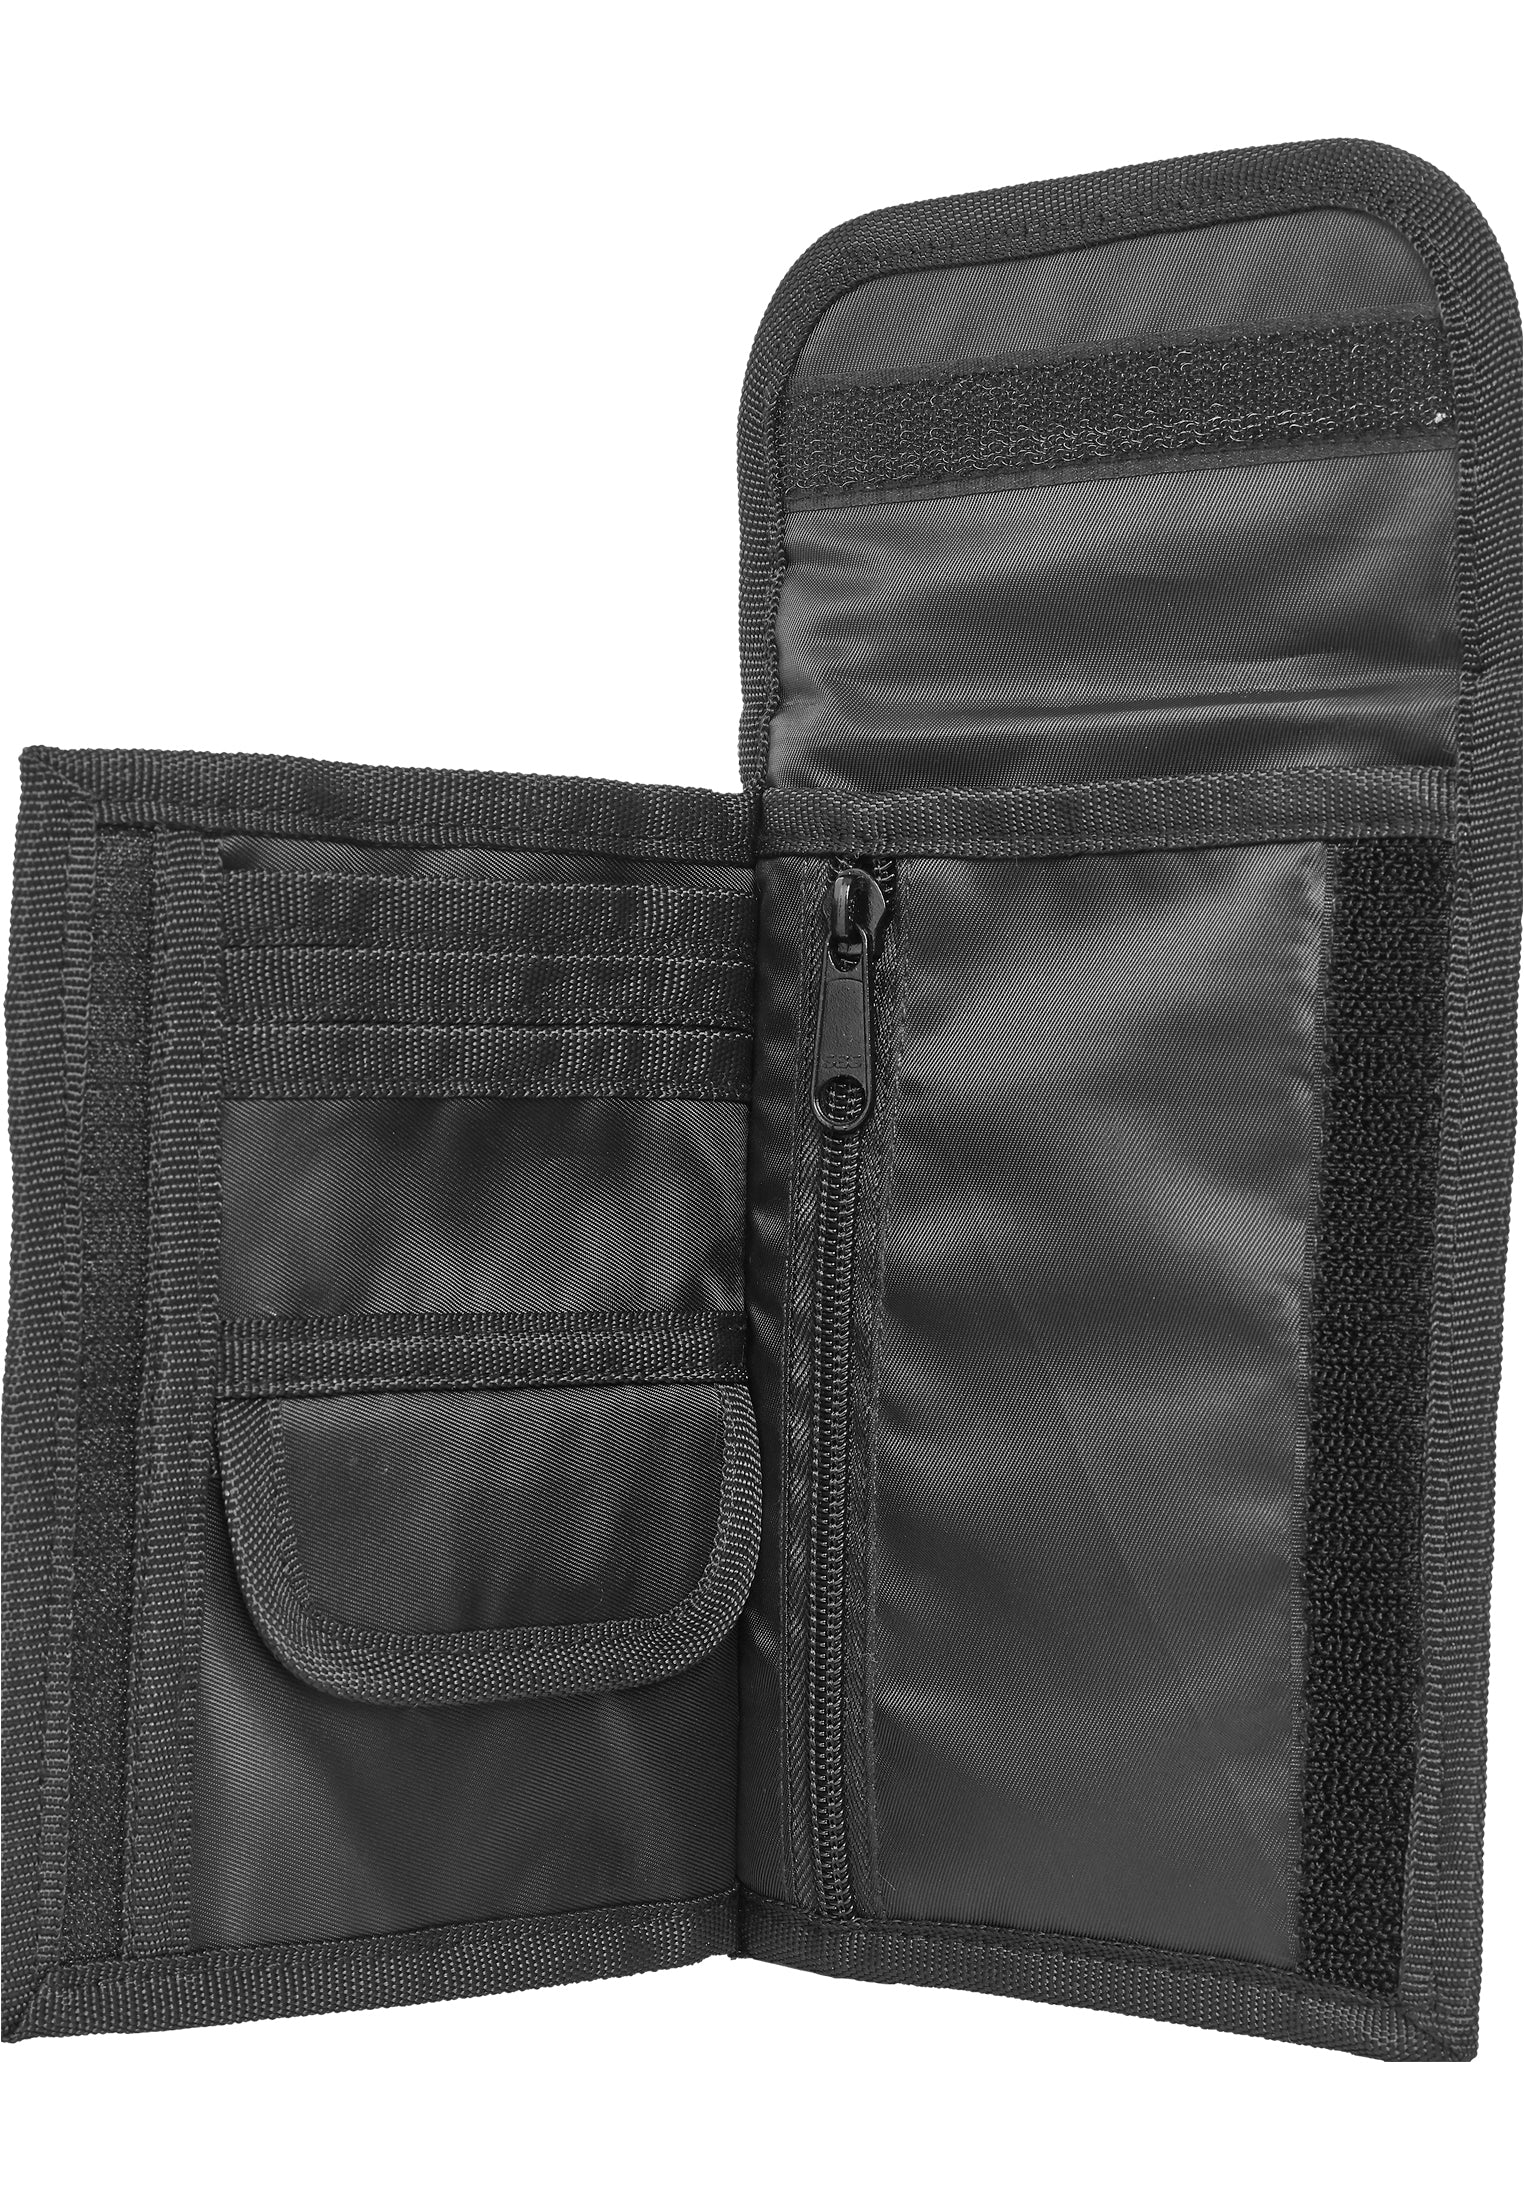 TB-2143 neck pouch coated